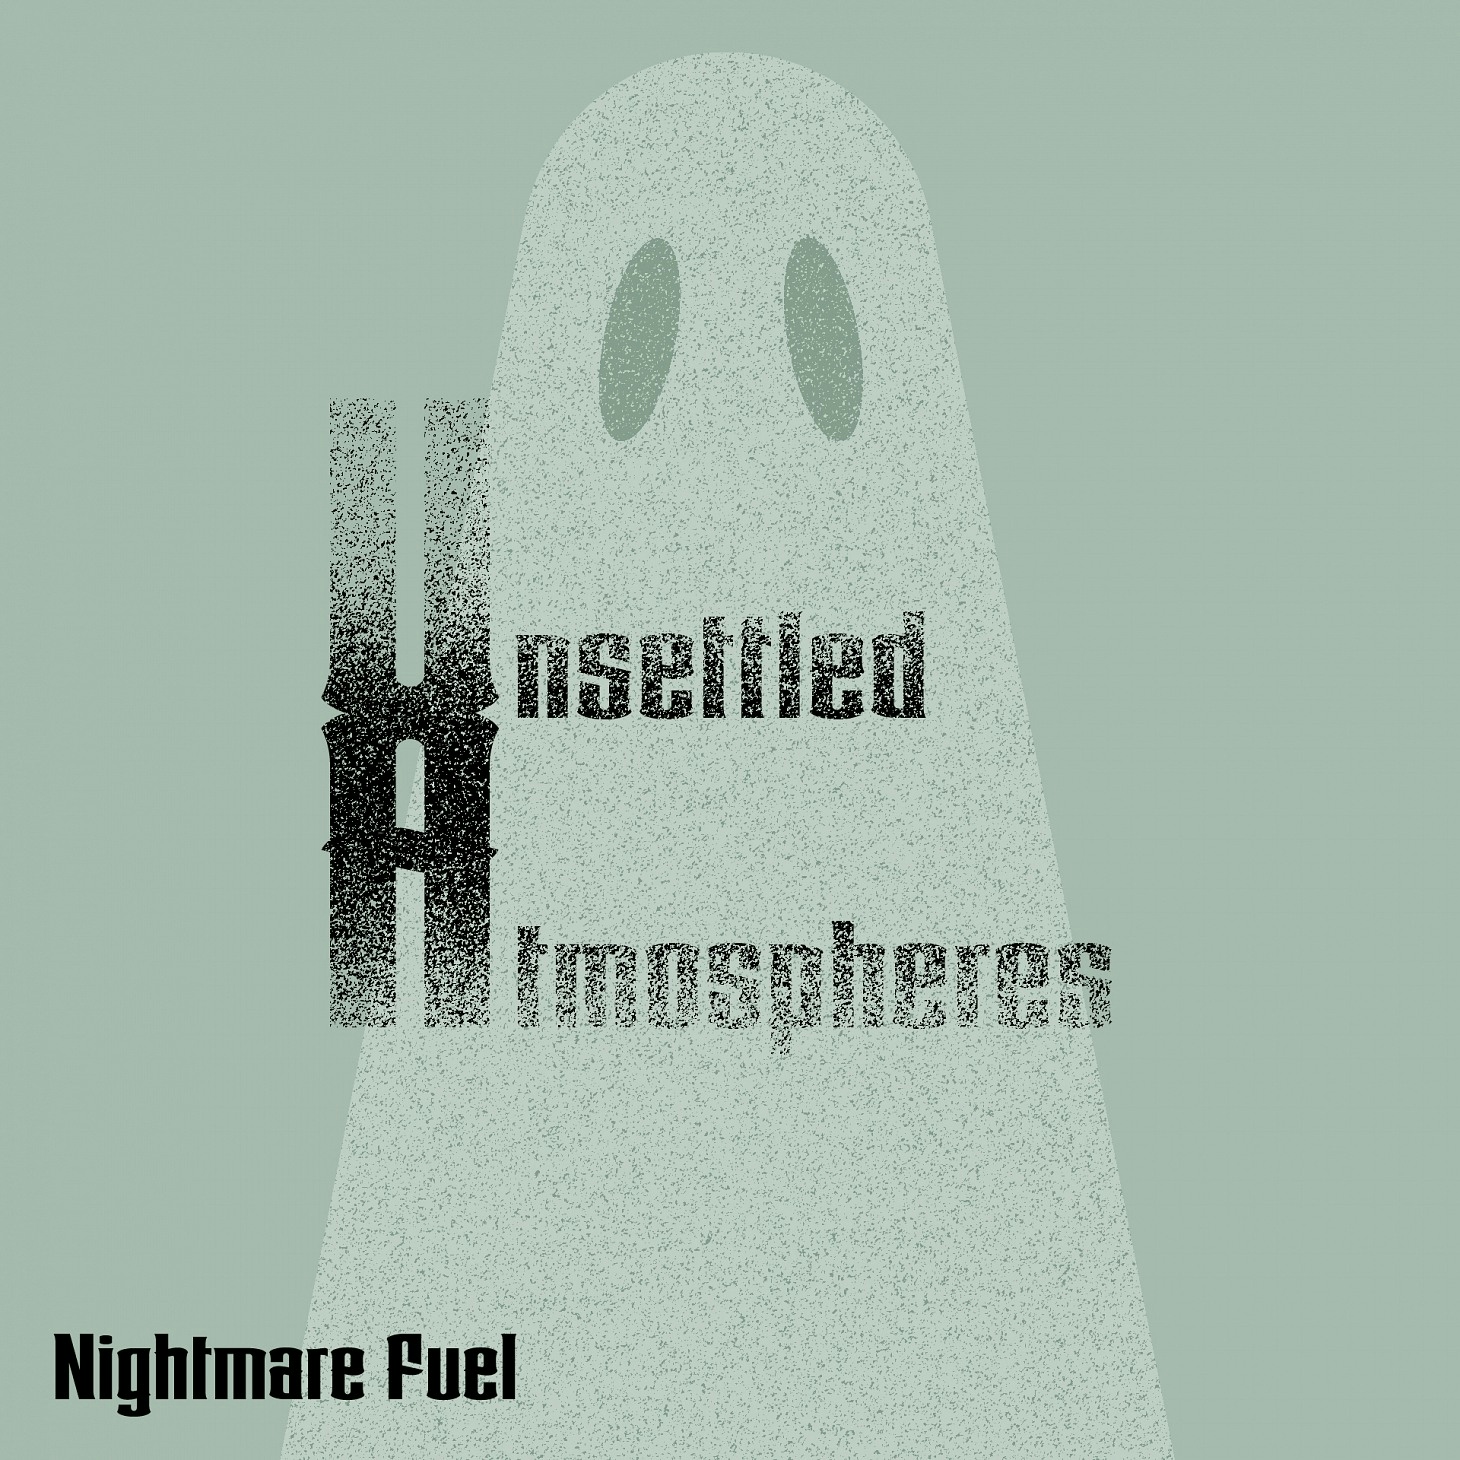 NMF004 Unsettled Atmospheres